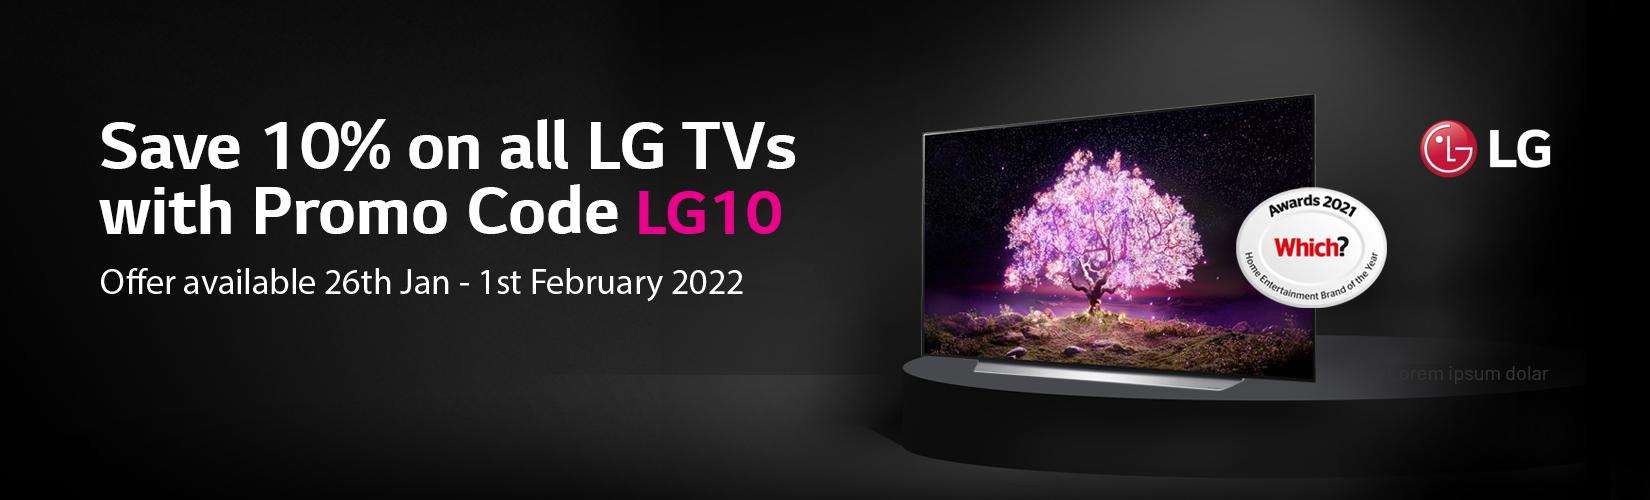 Save 10% on all LG TVs with Promo Code LG10. Offer available 26th Jan - 1st February 2022.